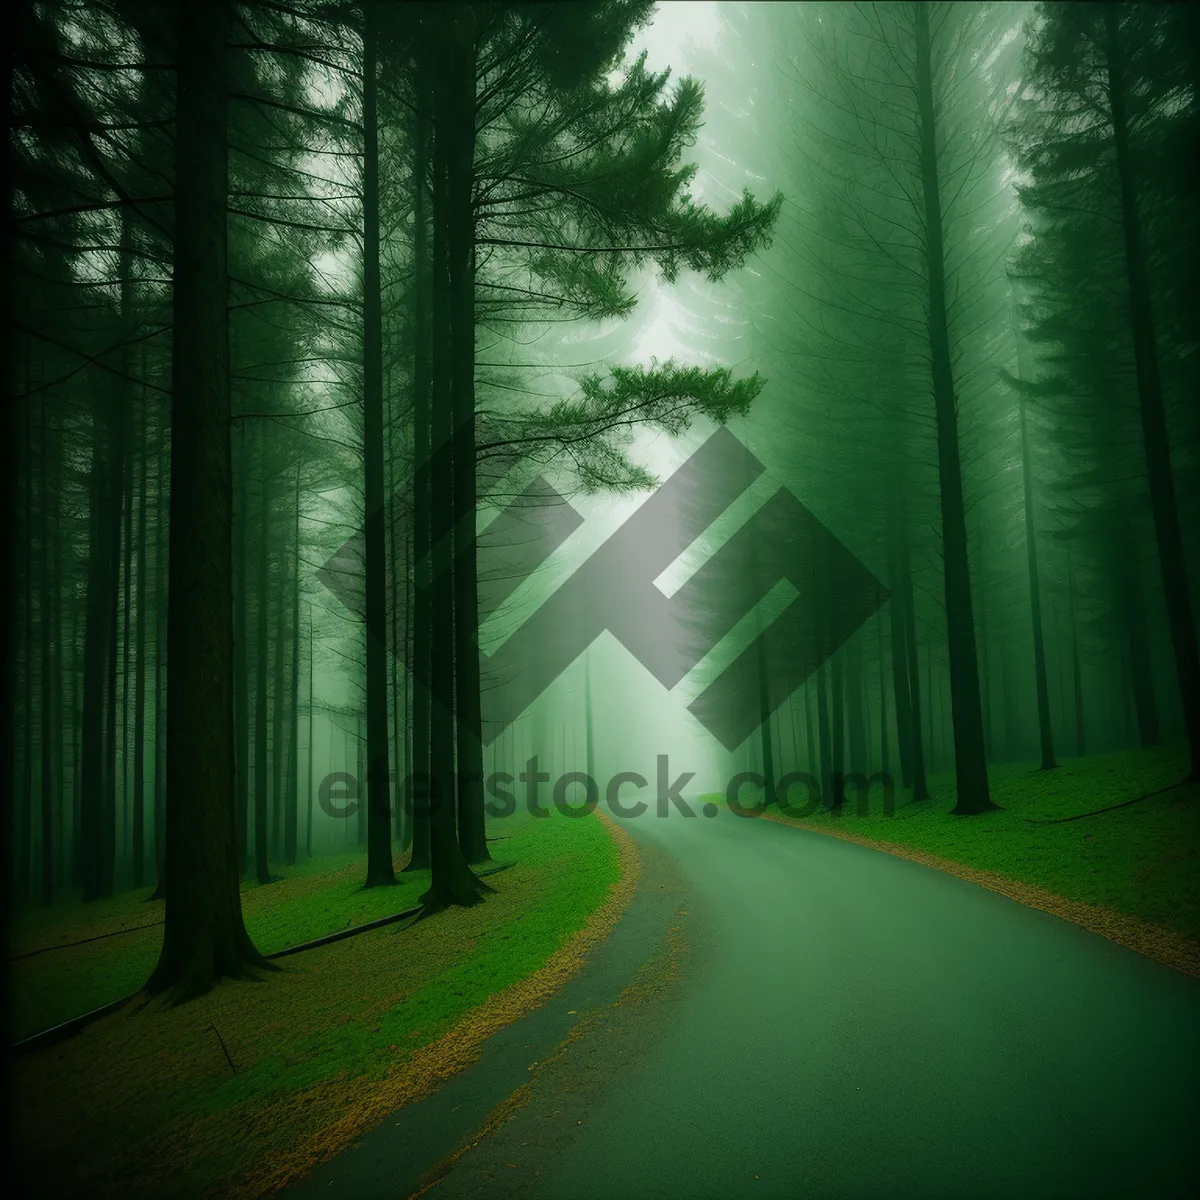 Picture of Misty Morning Forest Landscape in Summer